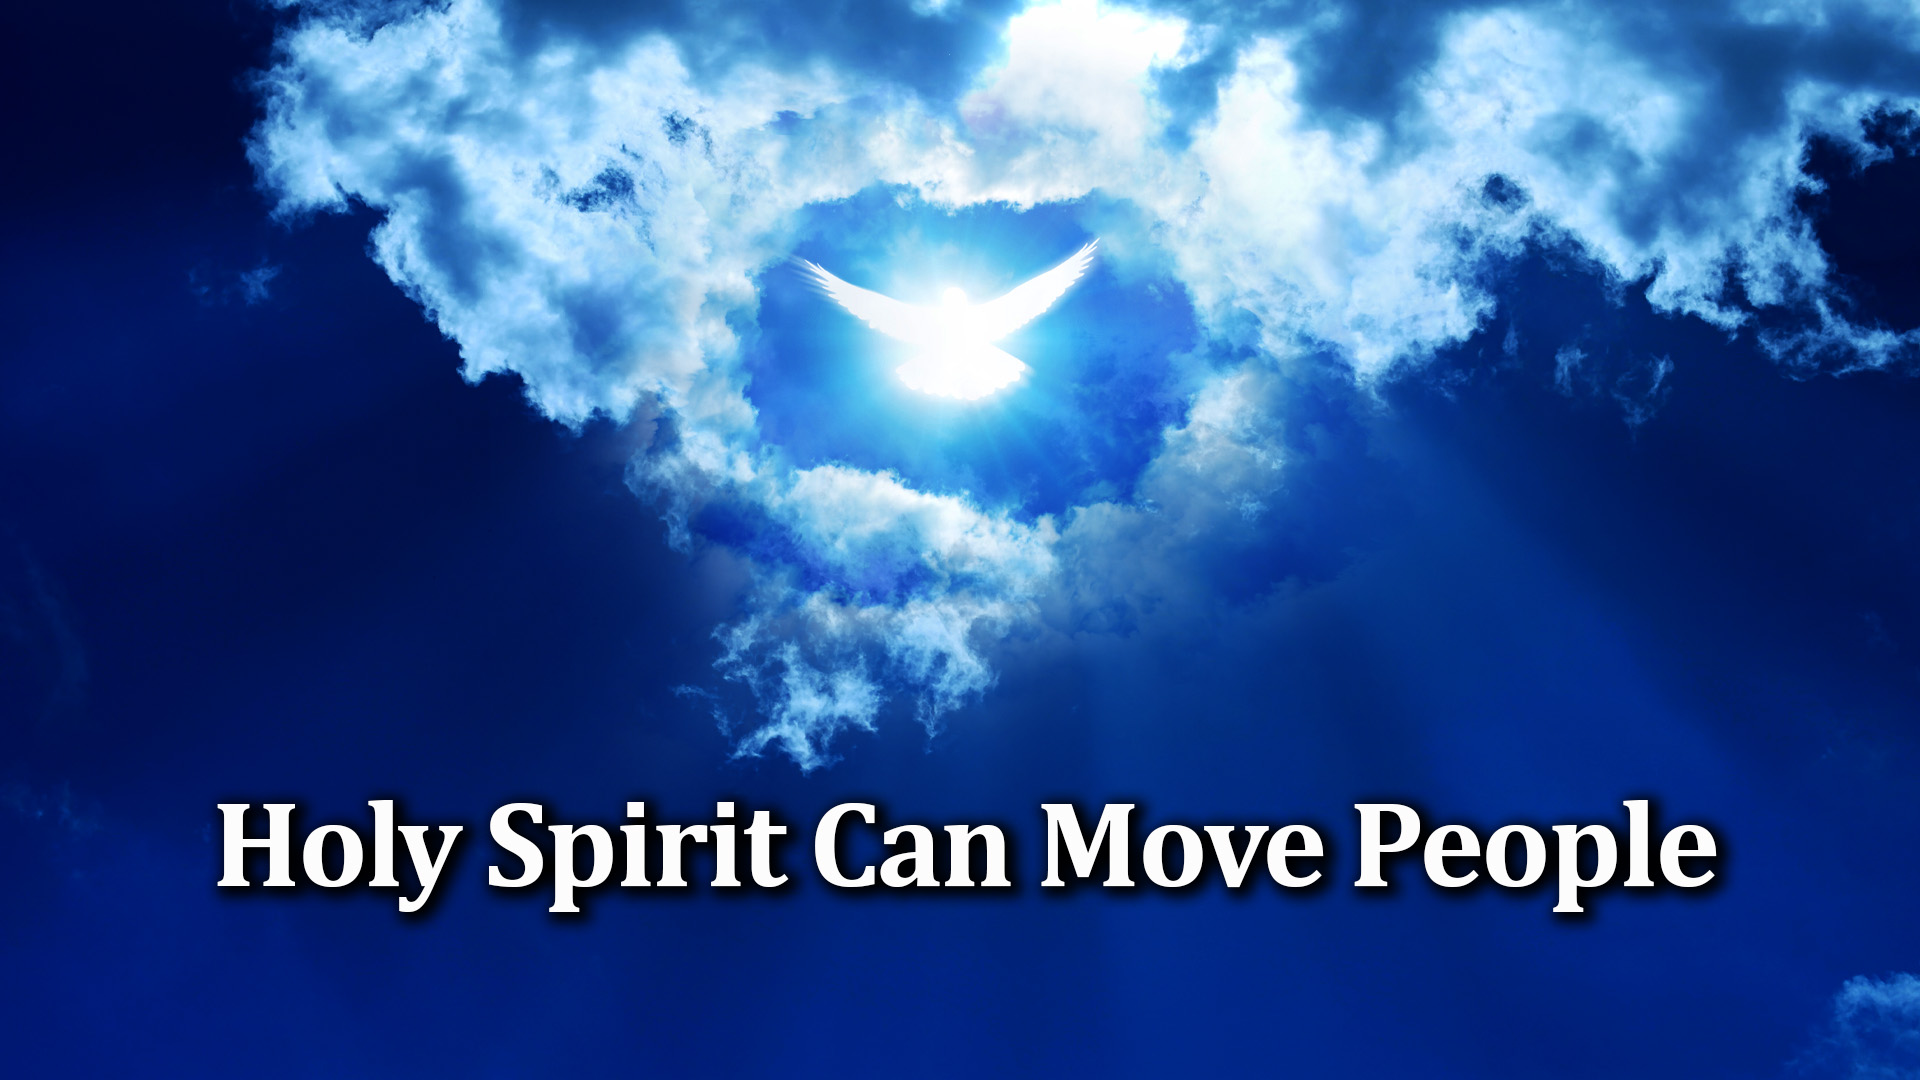 11-16-21 Holy Spirit Can Move People